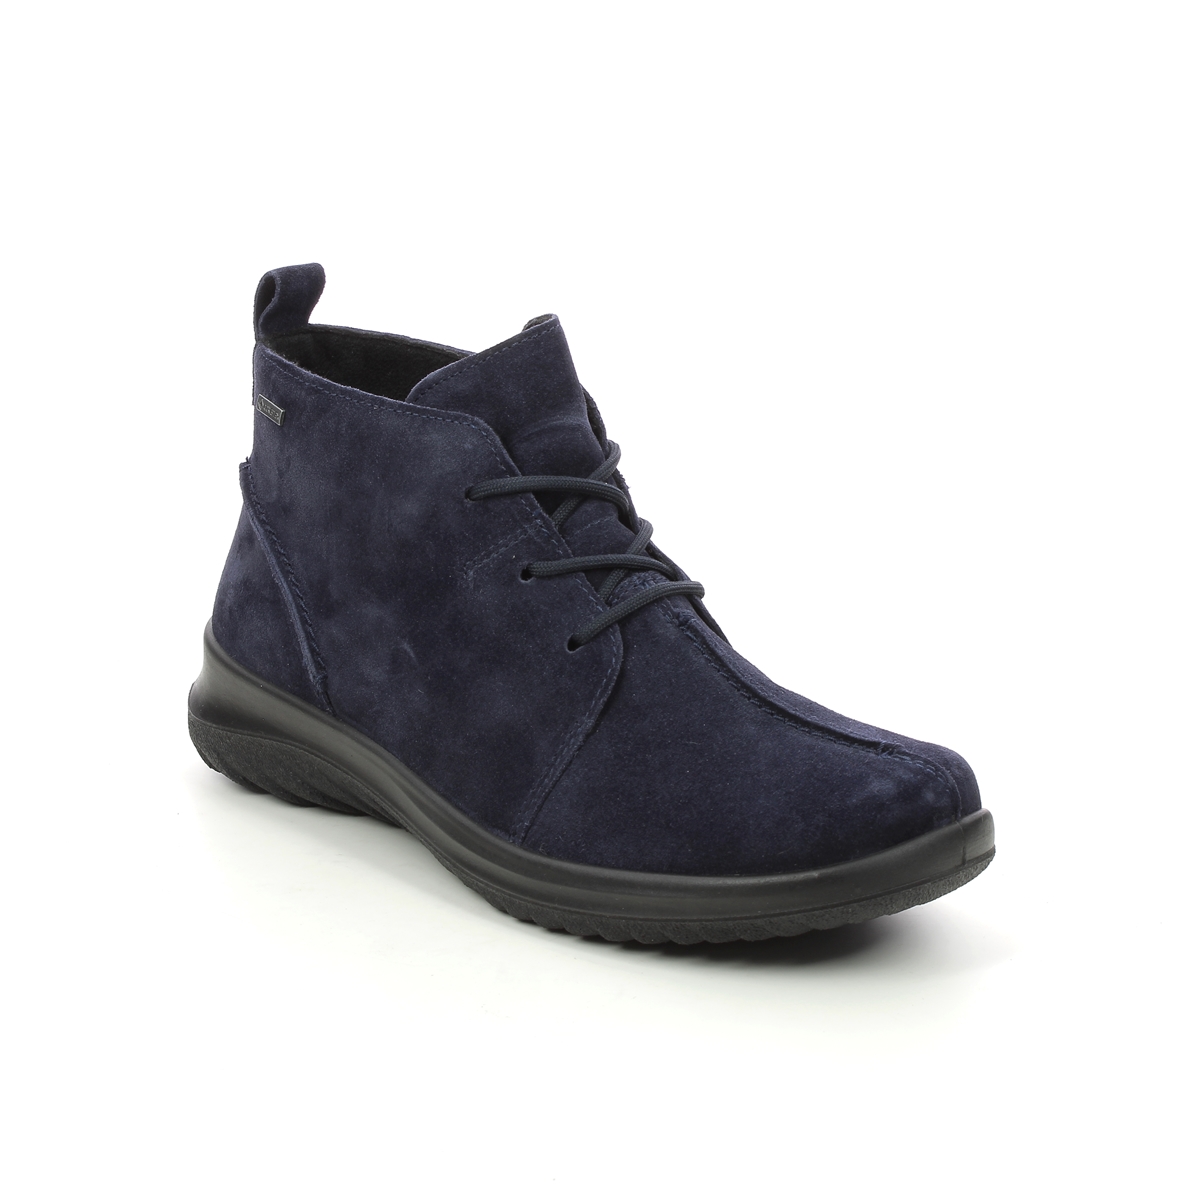 Legero Soft Lace Gtx Navy Suede Womens Lace Up Boots 2009569-8300 In Size 3.5 In Plain Navy Suede